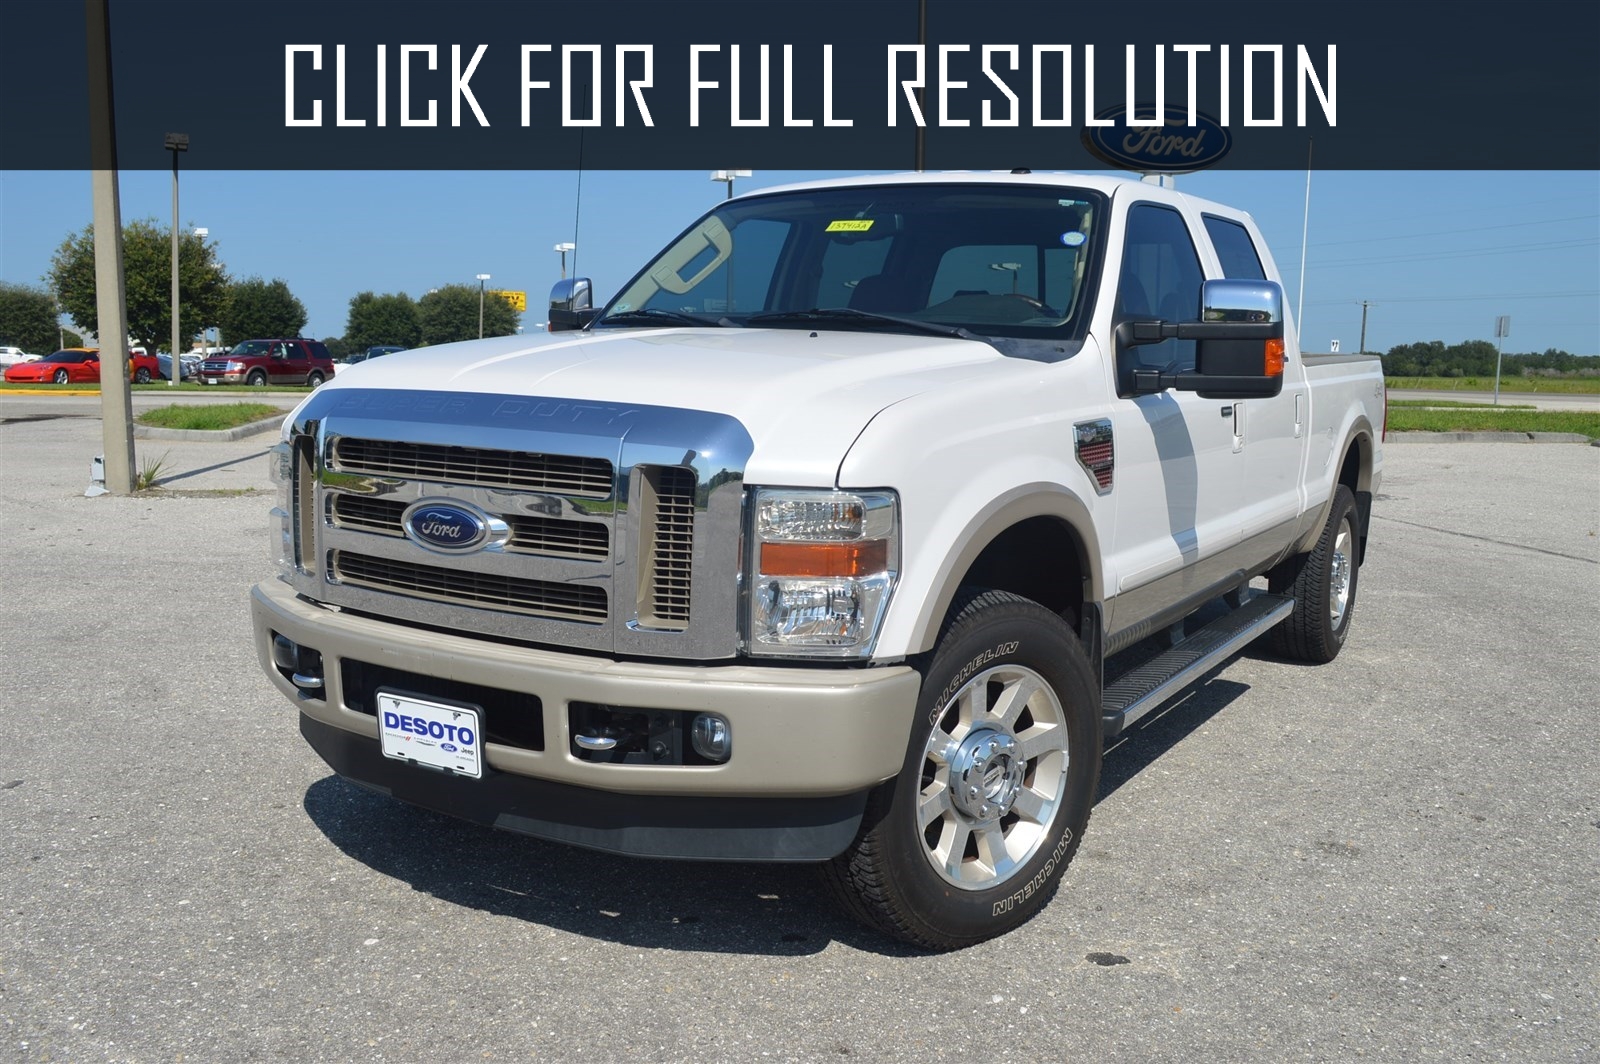 2010 Ford F350 King Ranch